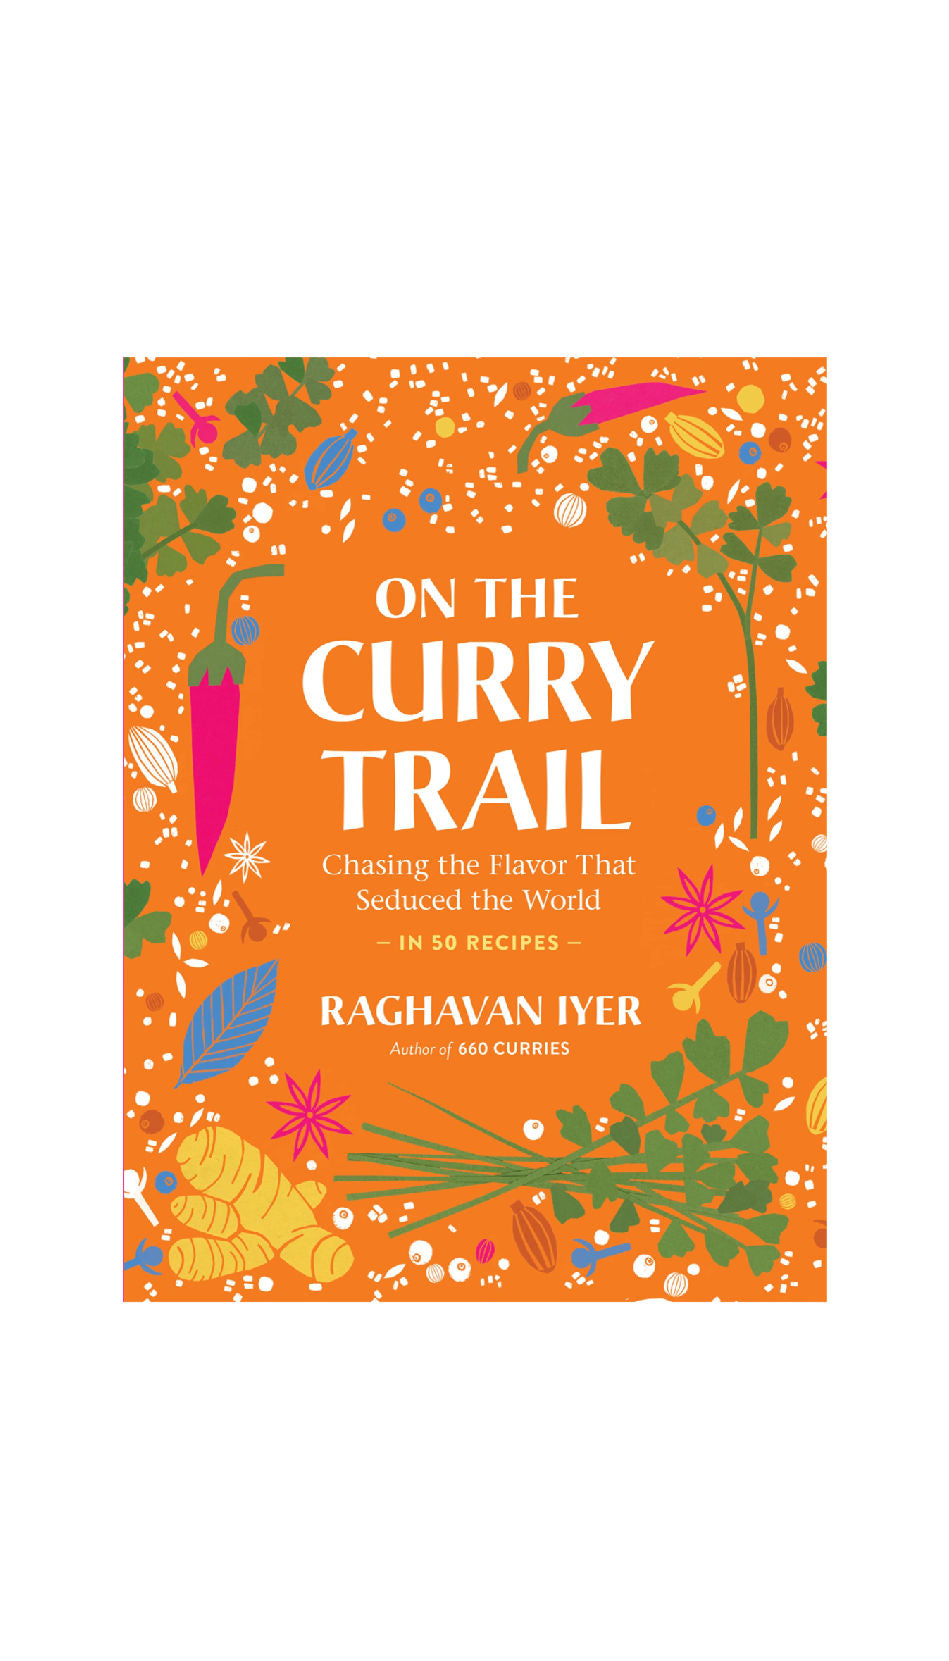 On the Curry Trail